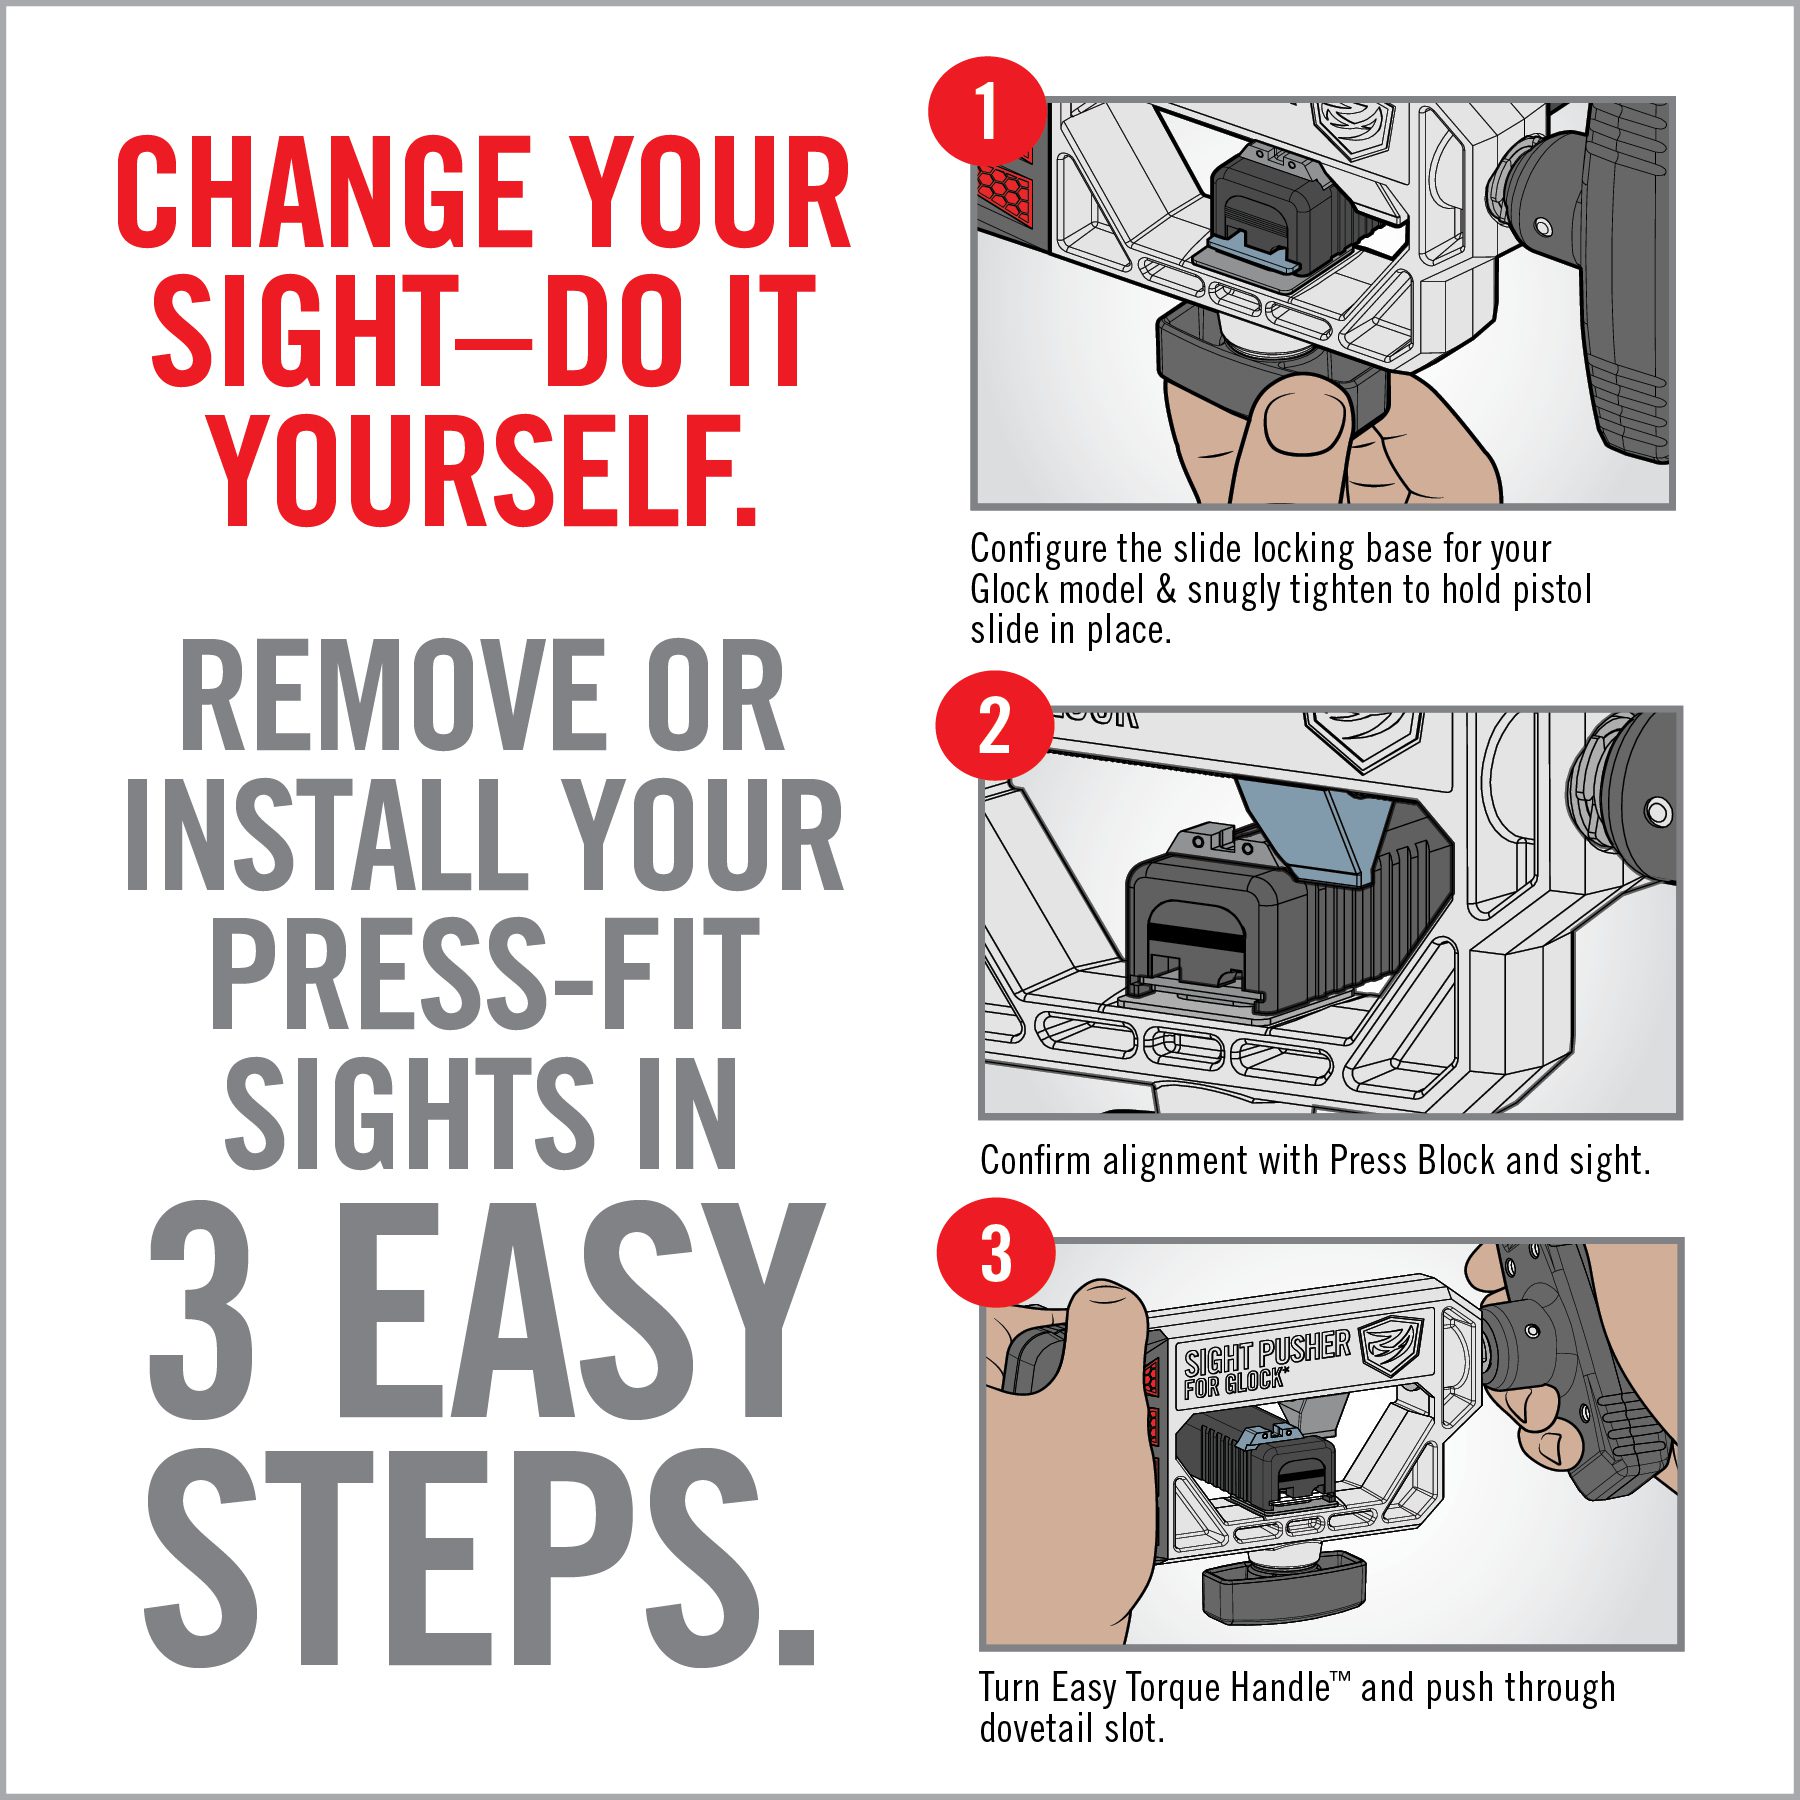 instructions to change the light - do it yourself